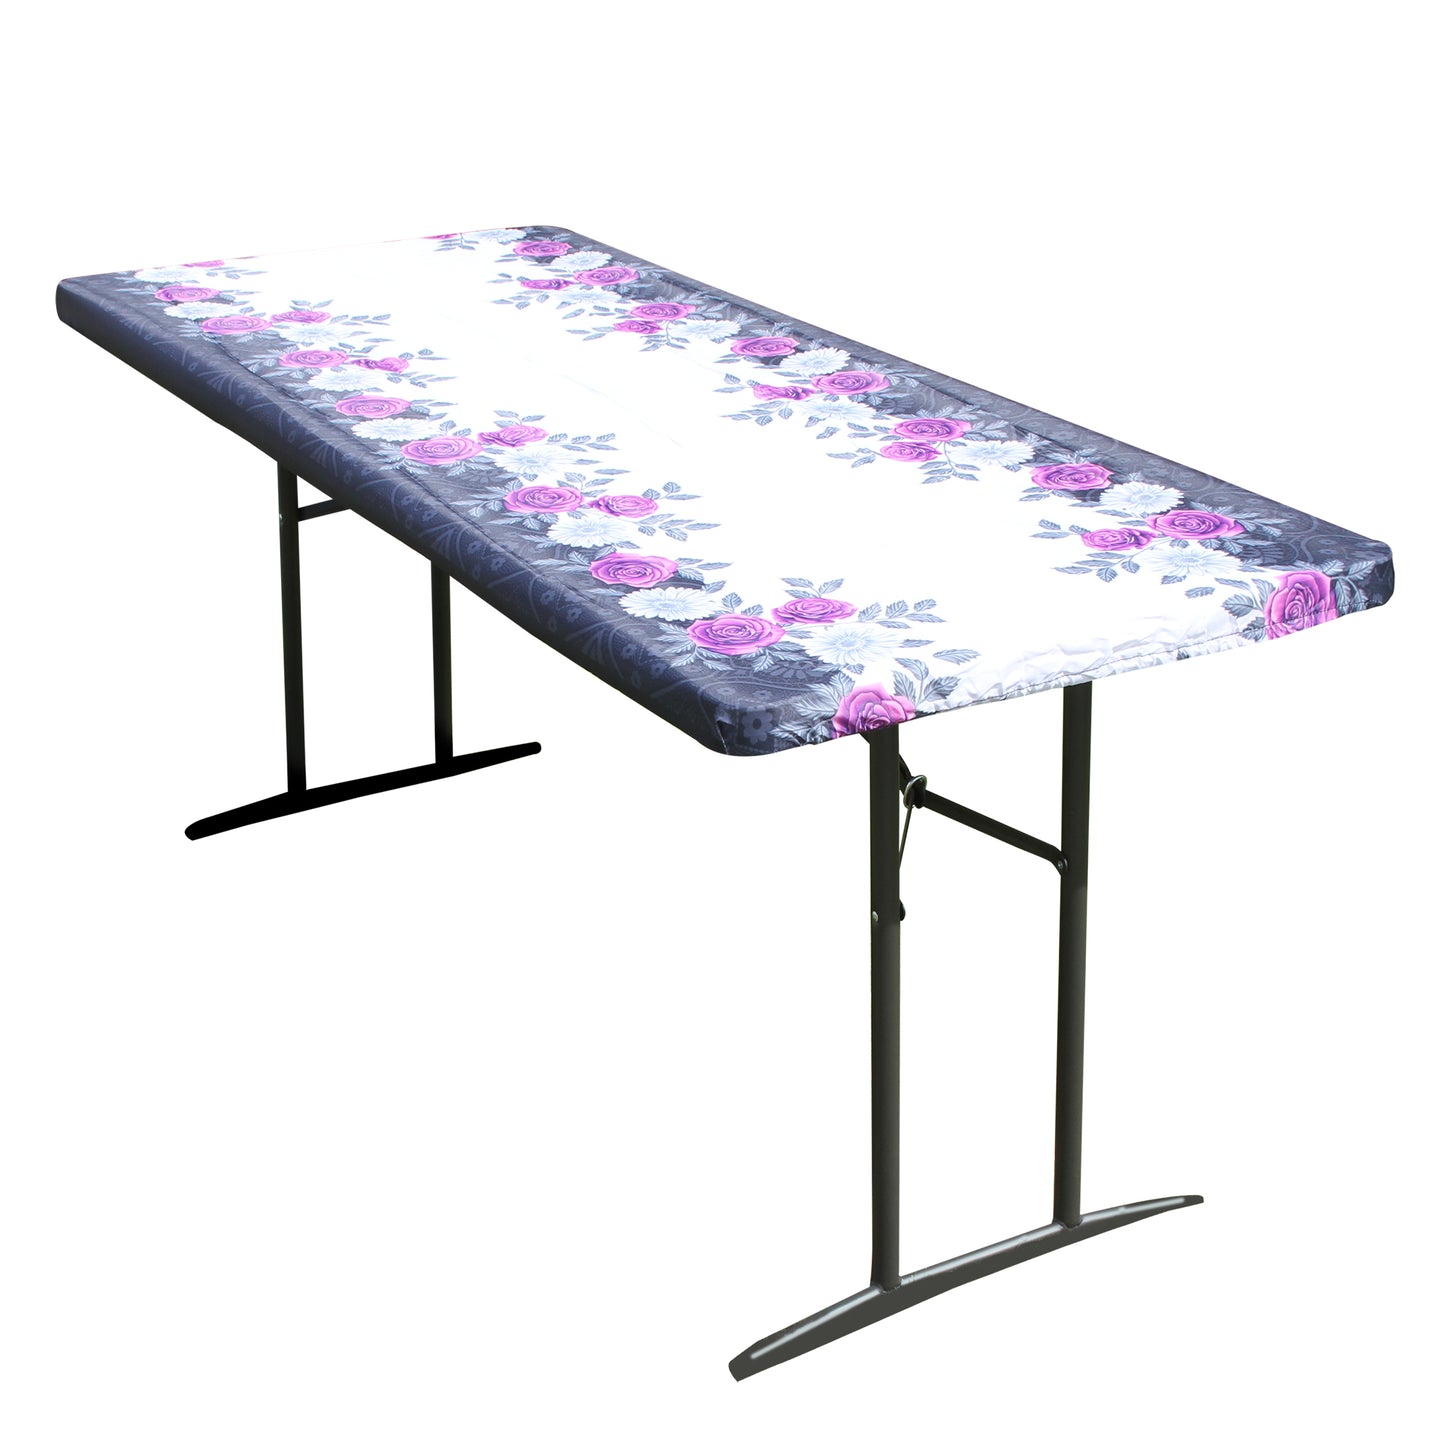 TableCloth PLUS 72" Roses Fitted Polyester Tablecloth for 6' Folding Tables is easy to clean, water proof, easy to install, and has an elastic rim